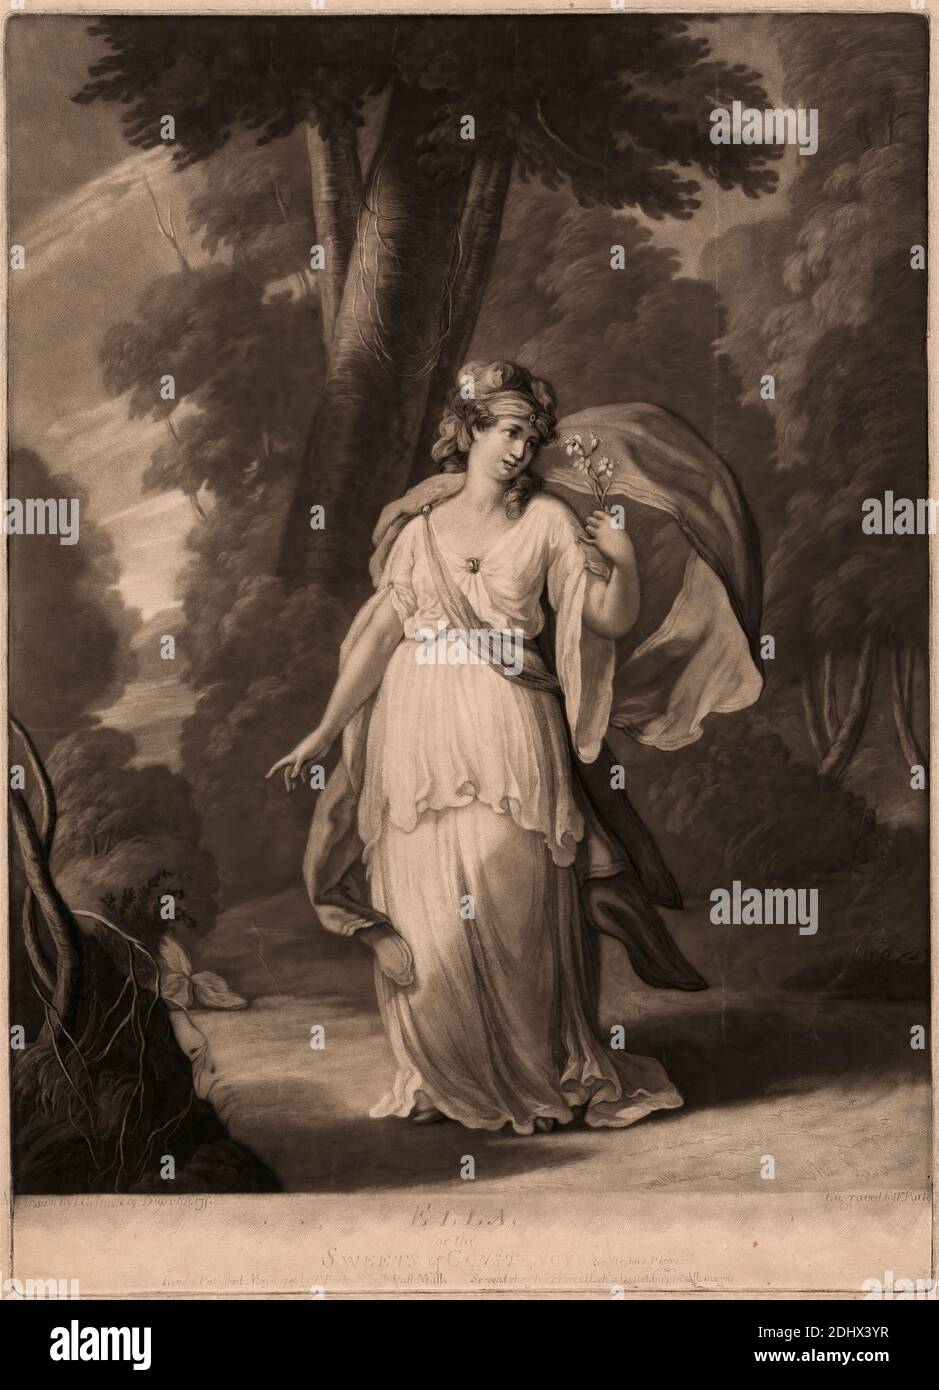 Ella, or the Sweets of Constancy, Print made by Thomas Park, ca. 1760–1834, British, after Johann Gerhard Huck, ca. 1759–1811, German, 1786, Mezzotint on moderately thick, moderately textured, beige, laid paper, Sheet: 15 9/16 × 11 1/2 inches (39.5 × 29.2 cm), Plate: 14 7/16 × 10 7/16 inches (36.7 × 26.5 cm), and Image: 13 1/4 × 10 7/16 inches (33.7 × 26.5 cm Stock Photo